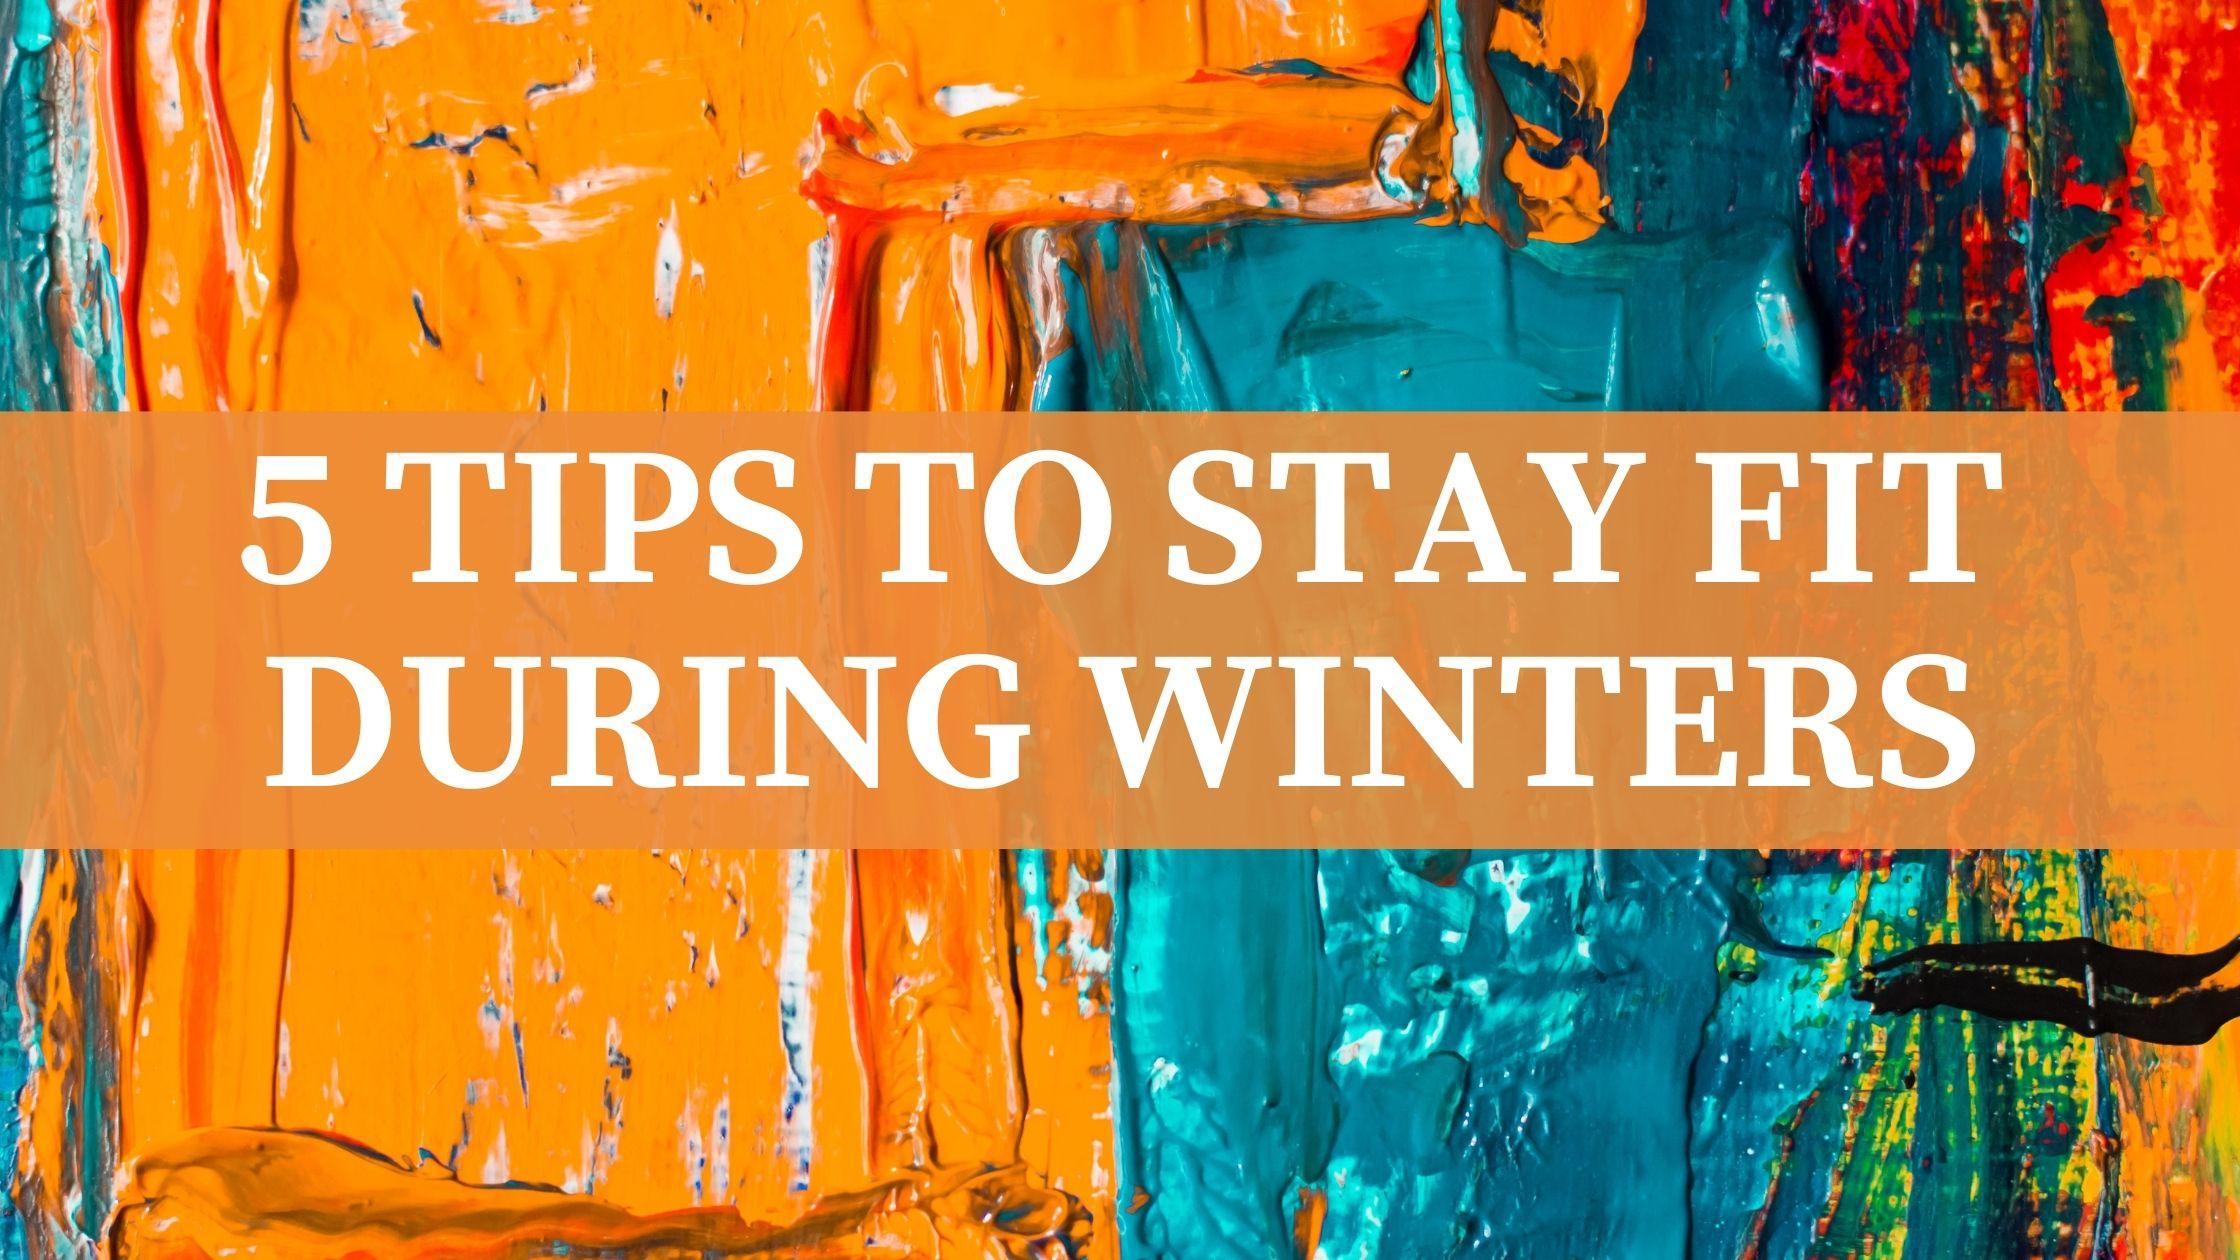 5 tips to stay fit during winters